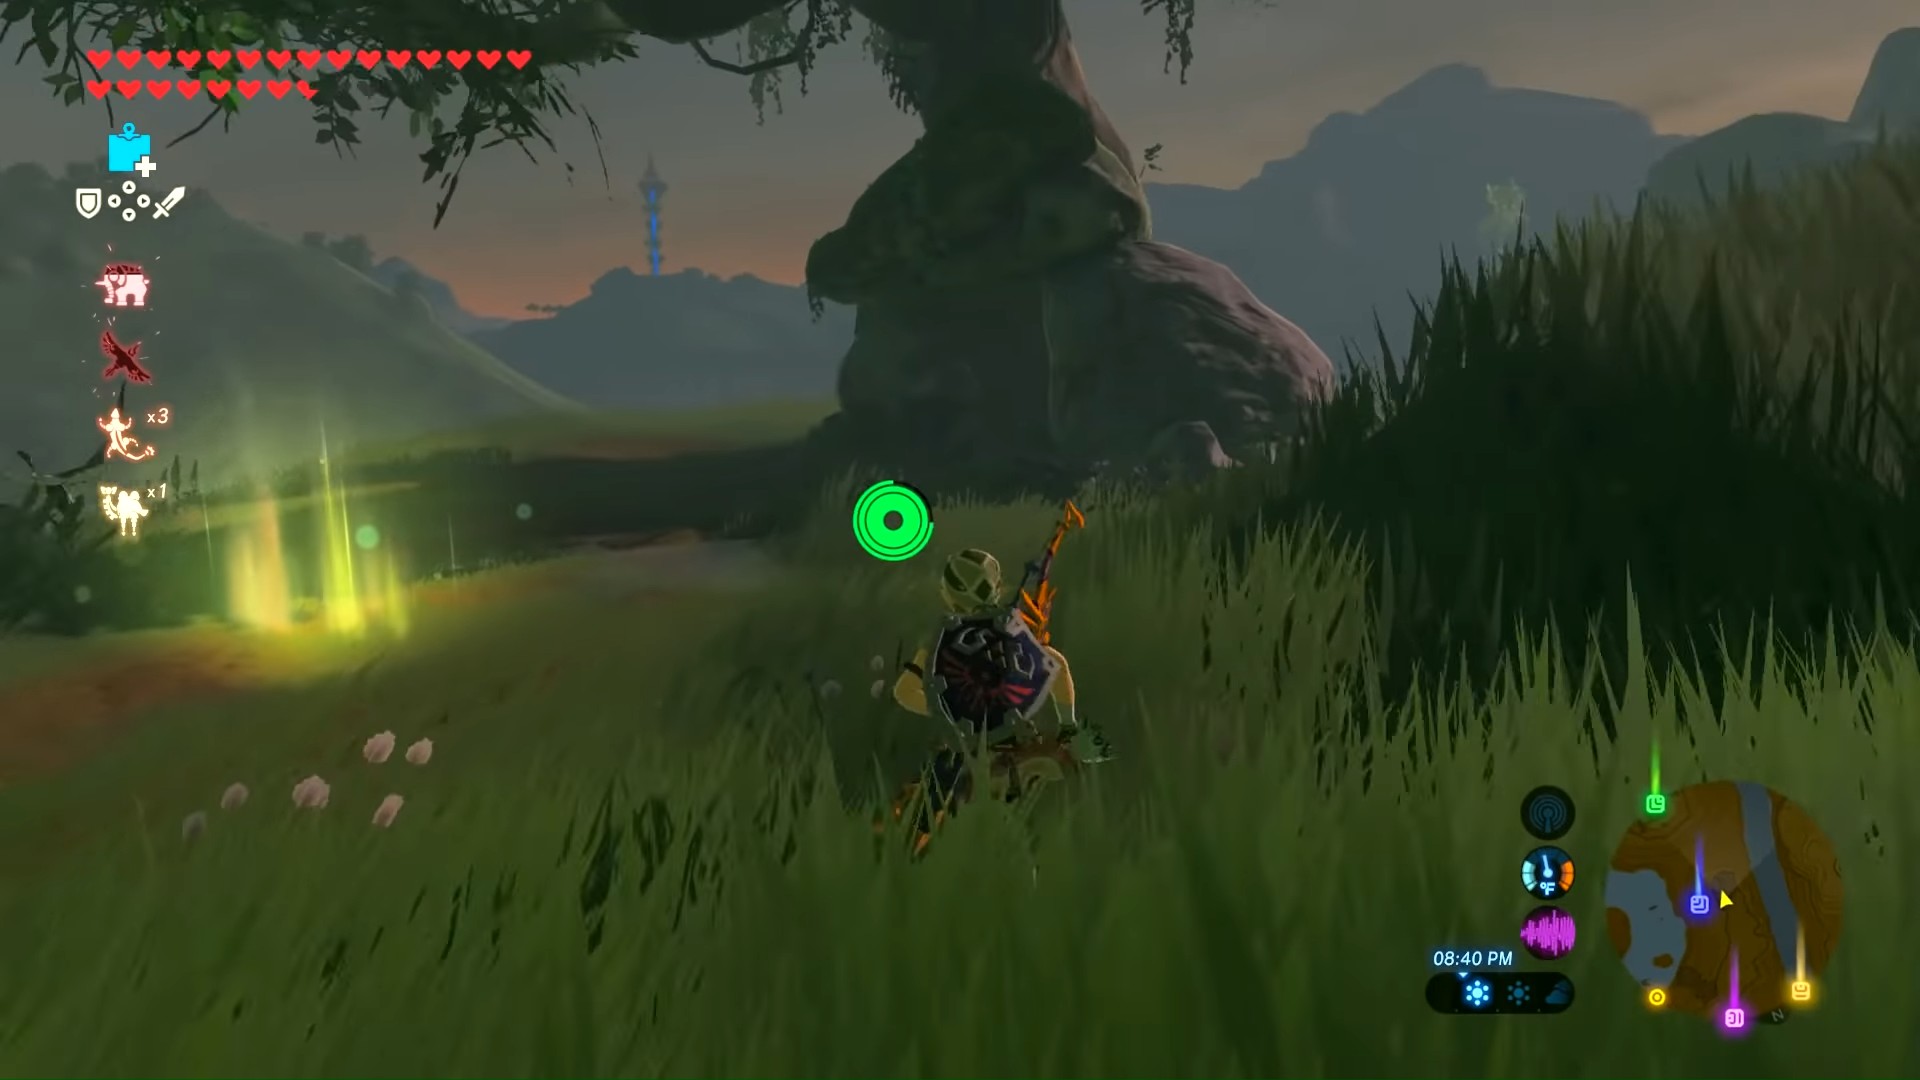 All Captured Memory Locations In BOTW